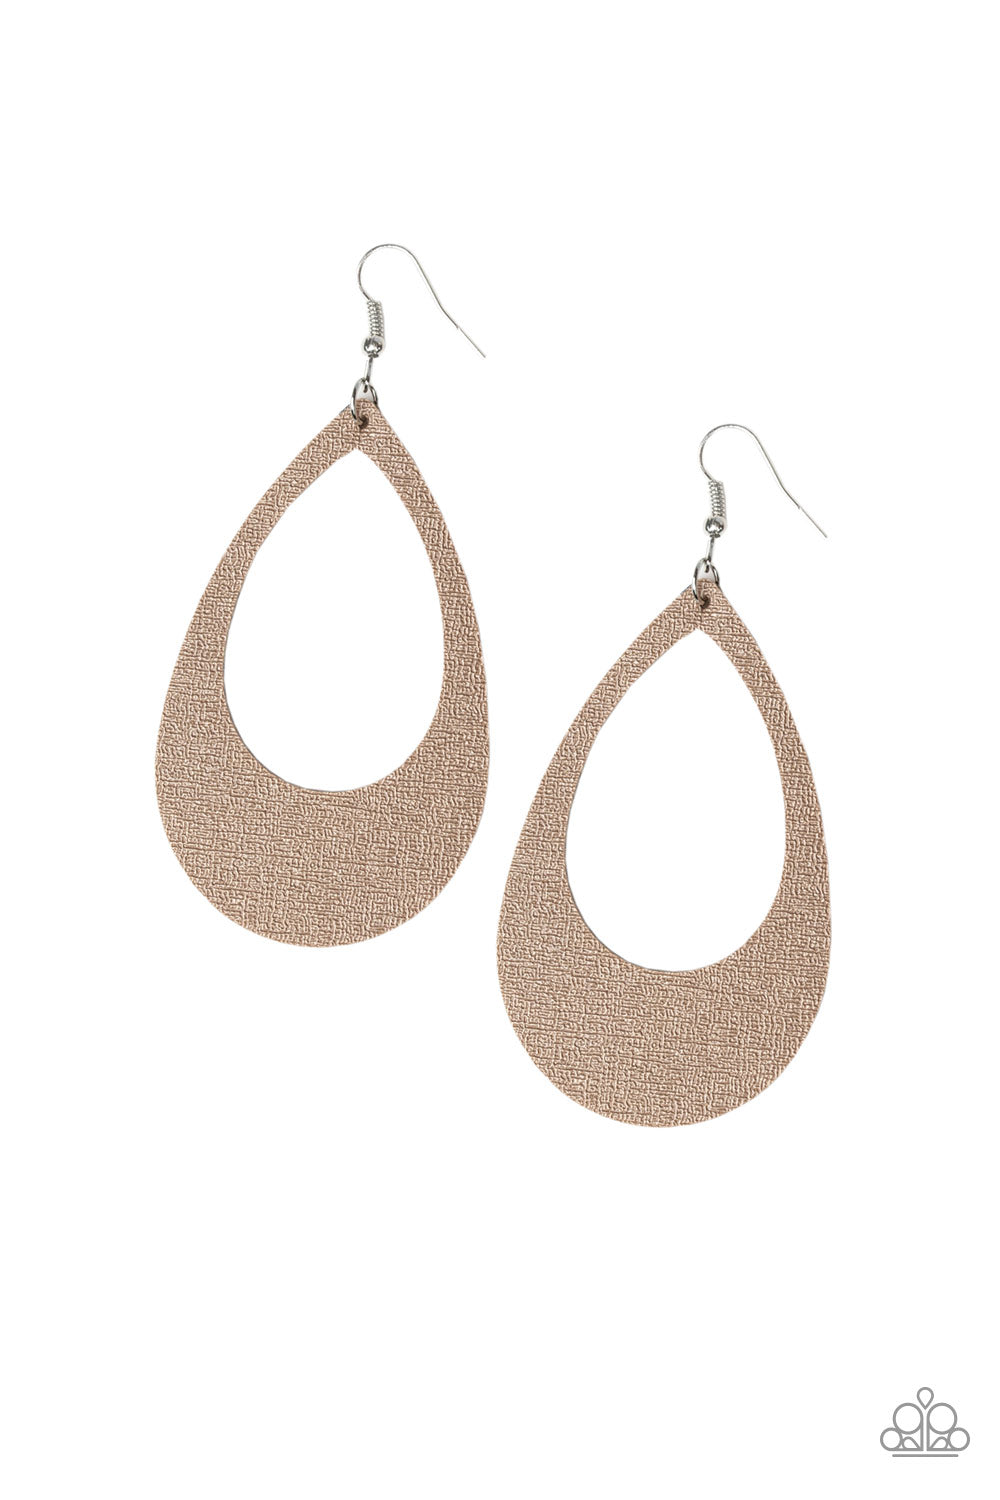 What a Natural Brown Paparazzi Earrings Cashmere Pink Jewels - Cashmere Pink Jewels & Accessories, Cashmere Pink Jewels & Accessories - Paparazzi